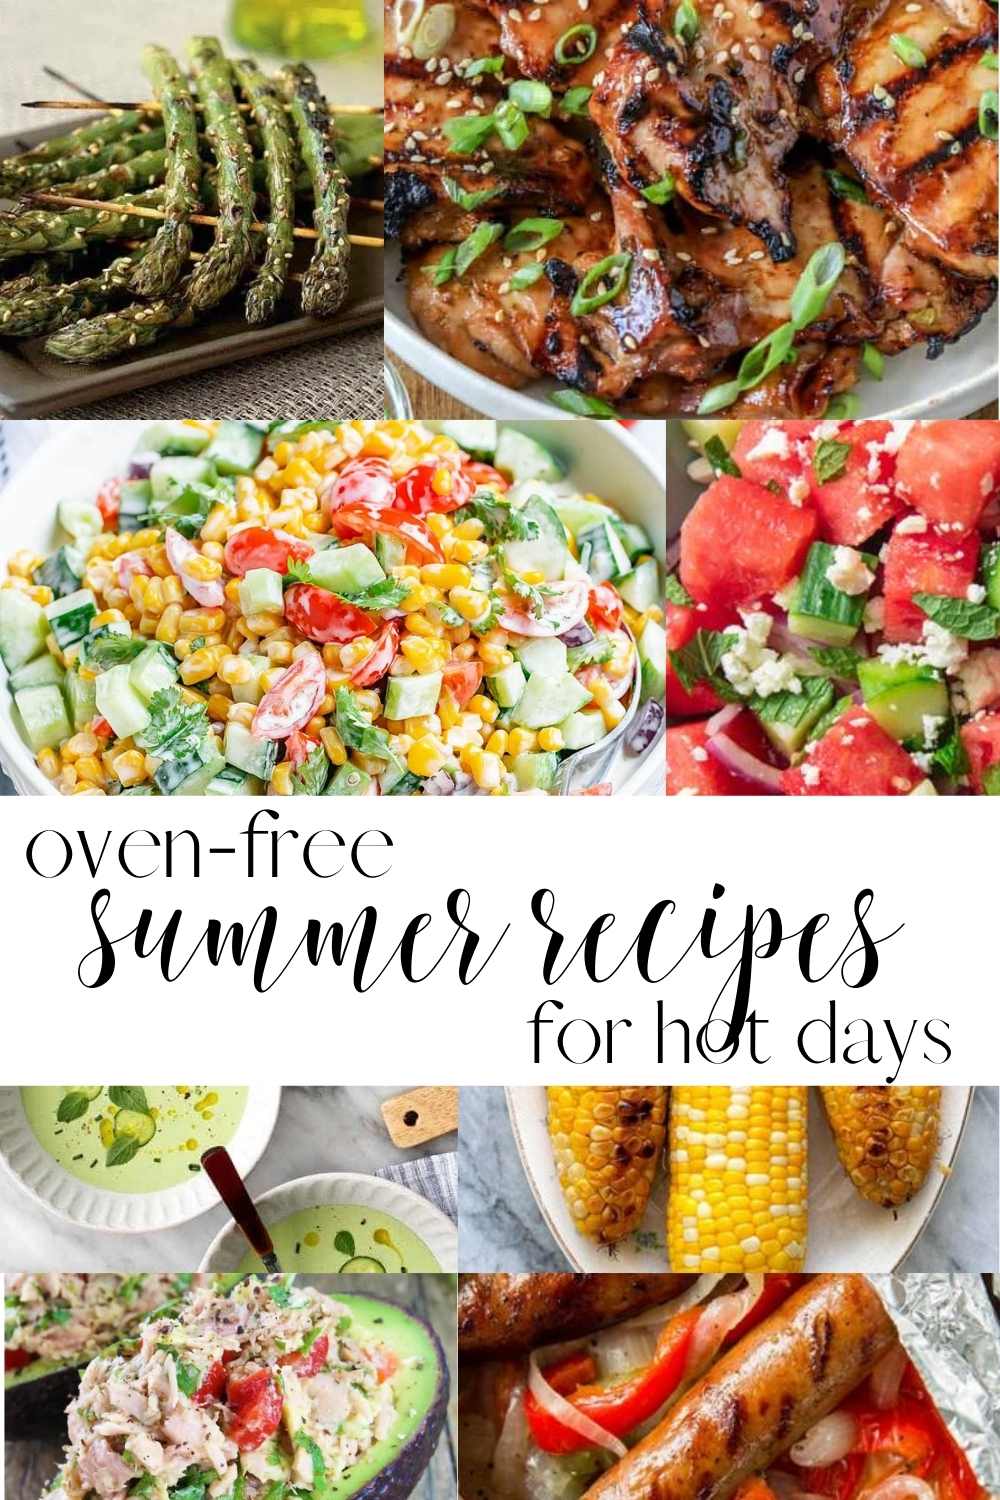 oven-free summer recipes for hot days Pinterest